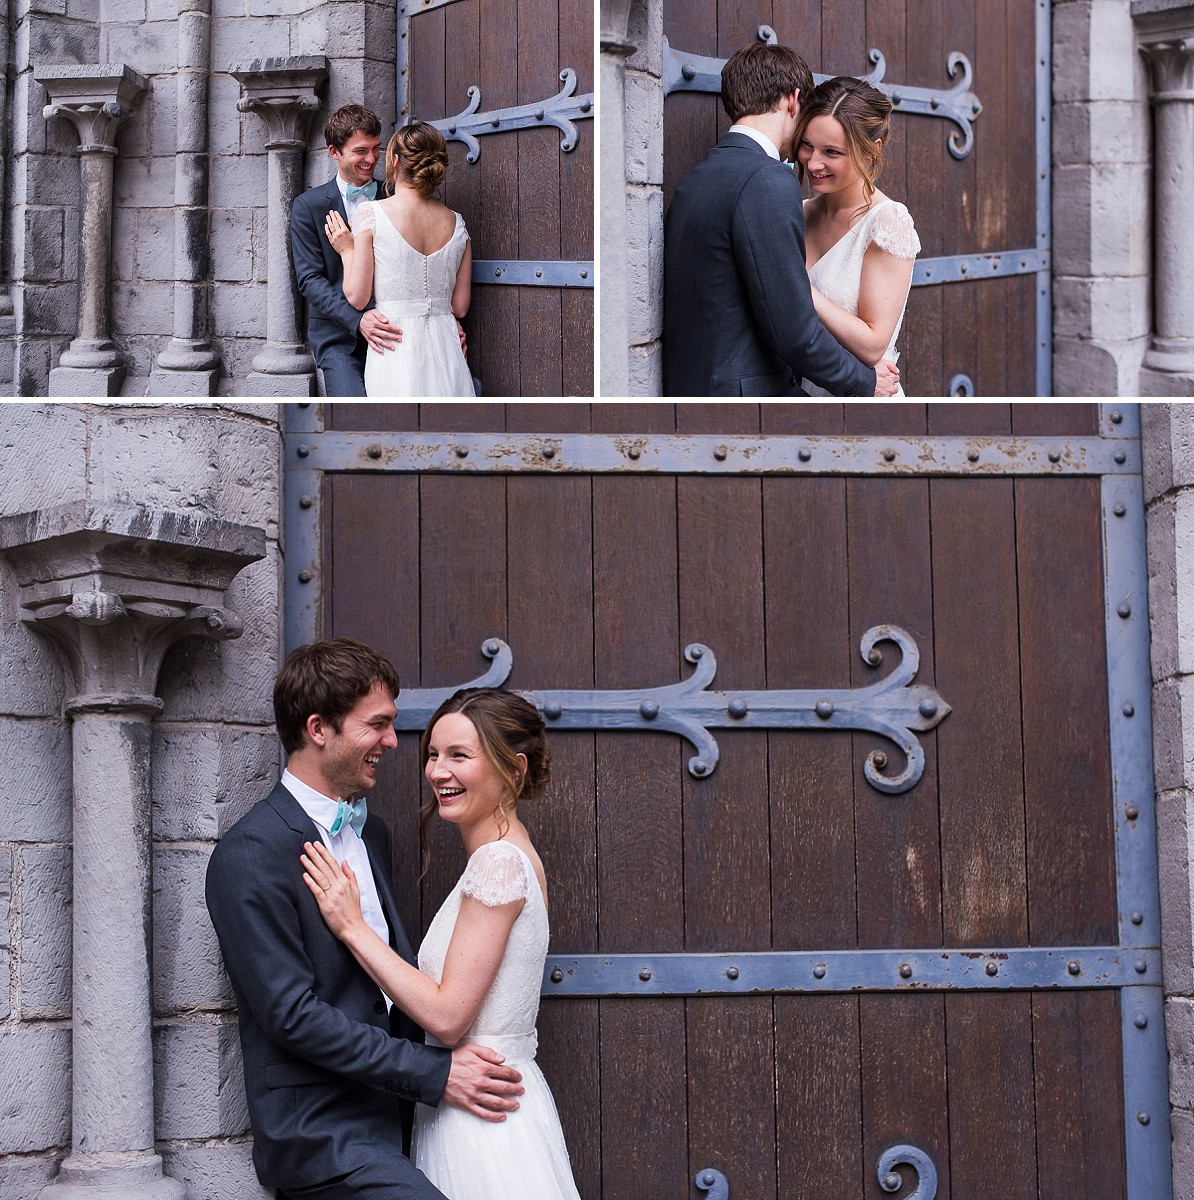 Séance photo de mariage à Bruges french wedding photographer with natural style